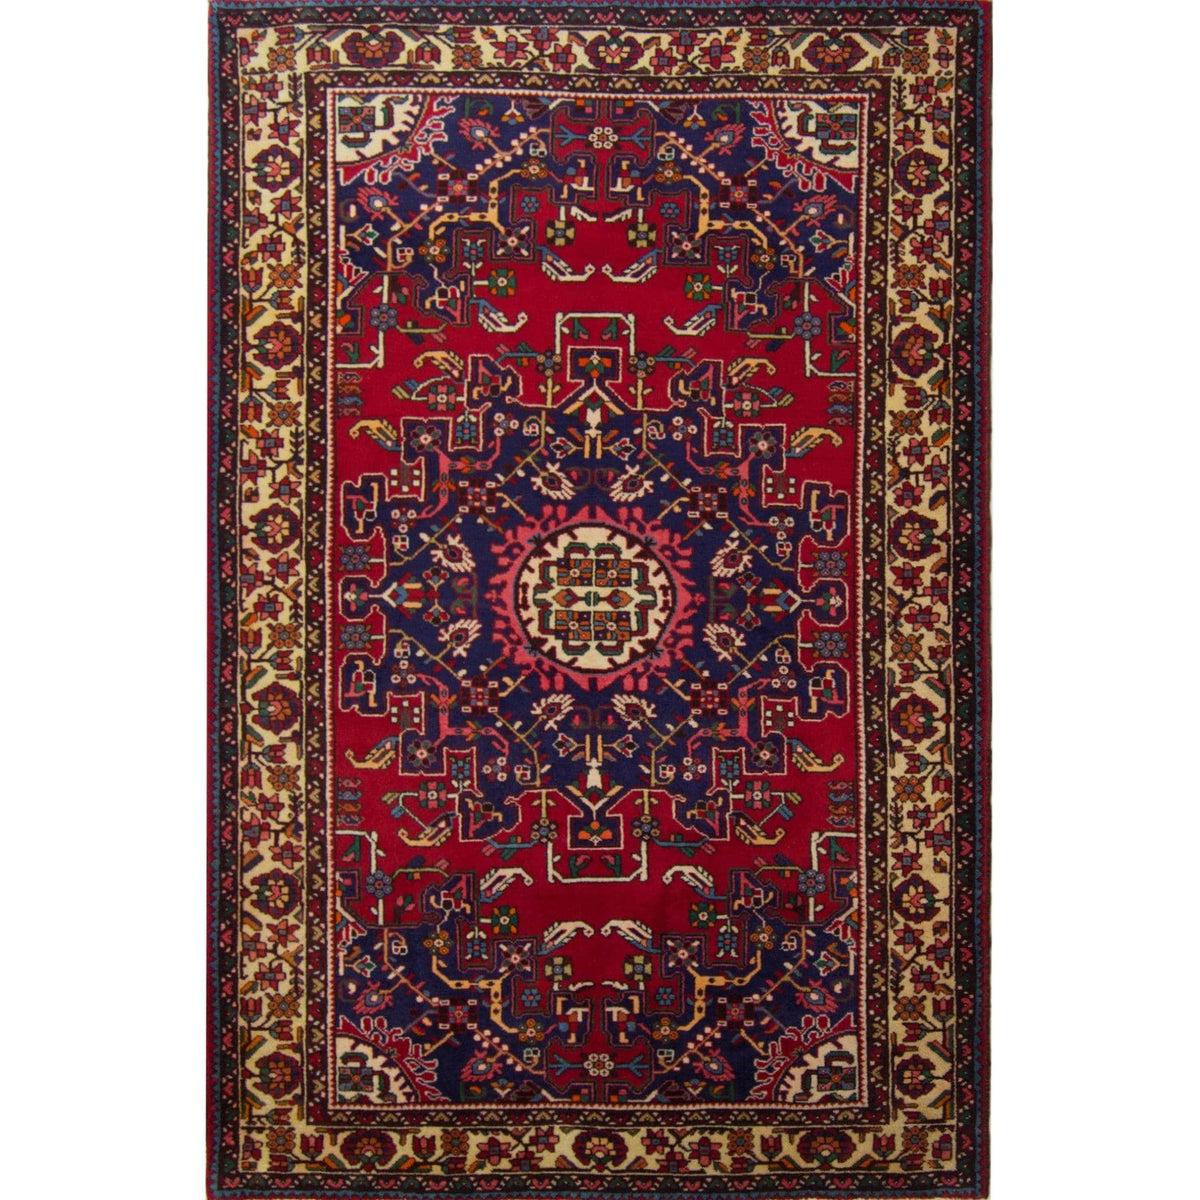 Authentic Hand-knotted Wool Persian Tafresh Rug 140cm x 204cm